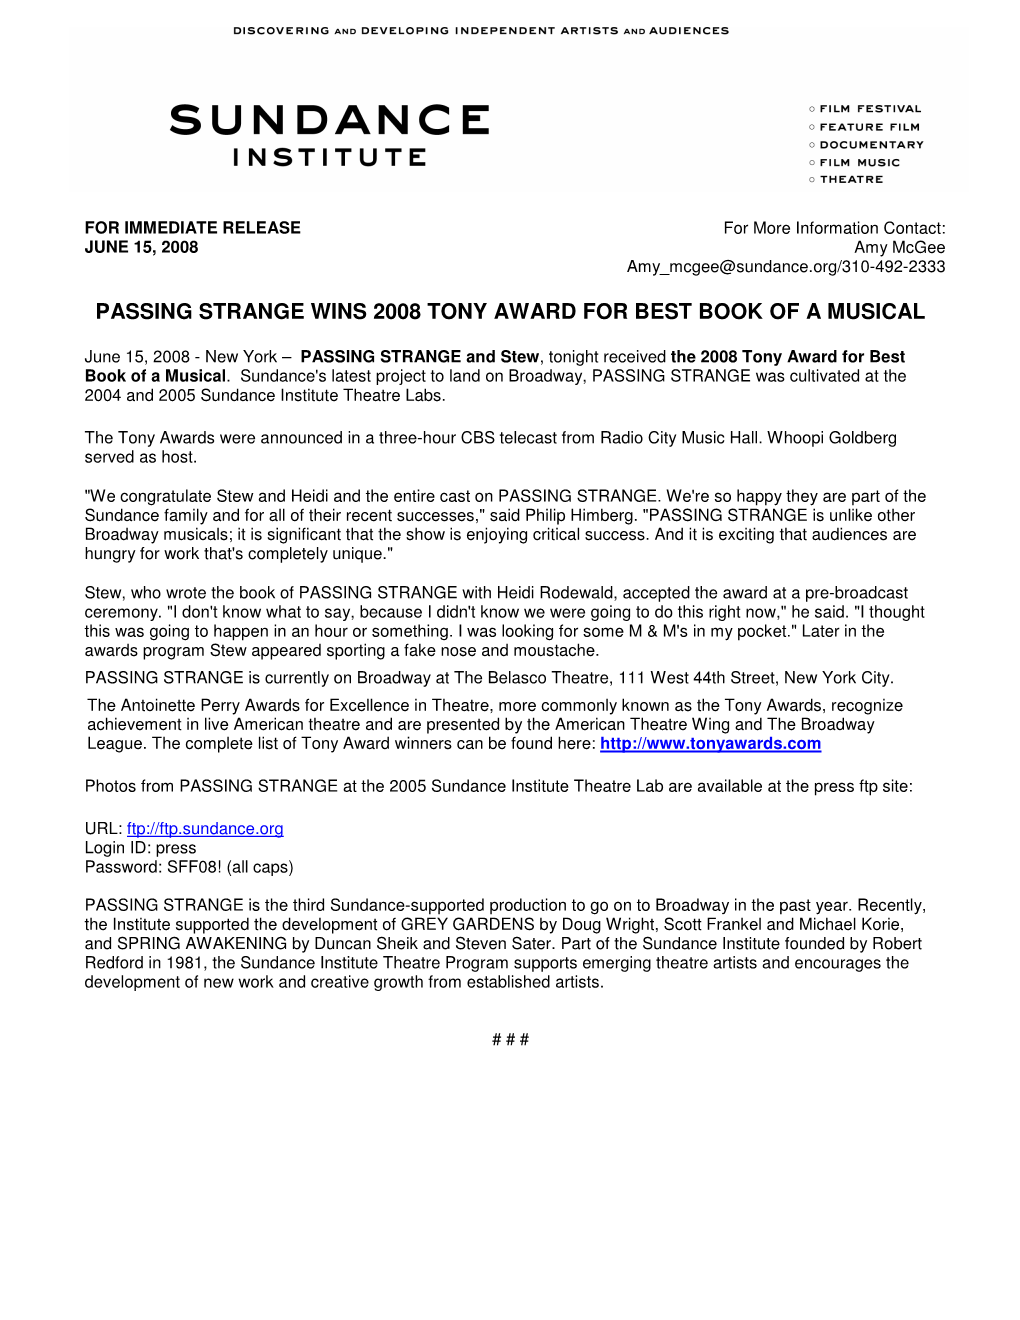 Passing Strange Wins 2008 Tony Award for Best Book of a Musical